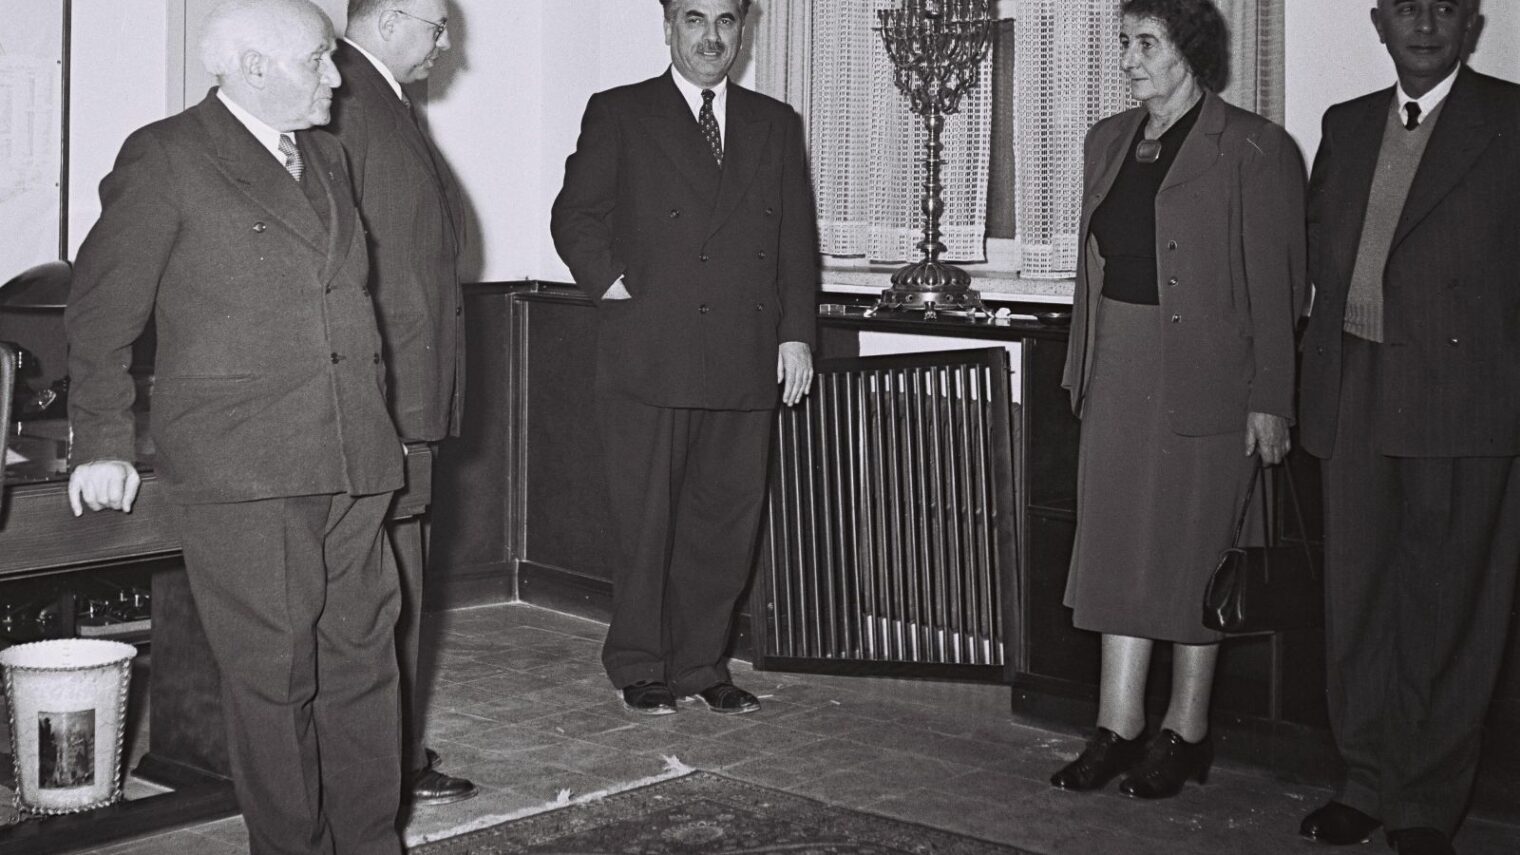 Government leaders including Golda Meir and David Ben Gurion gather for a candle-lighting ceremony after a cabinet meeting in 1953. Photo by David Eldan/Government Press Office